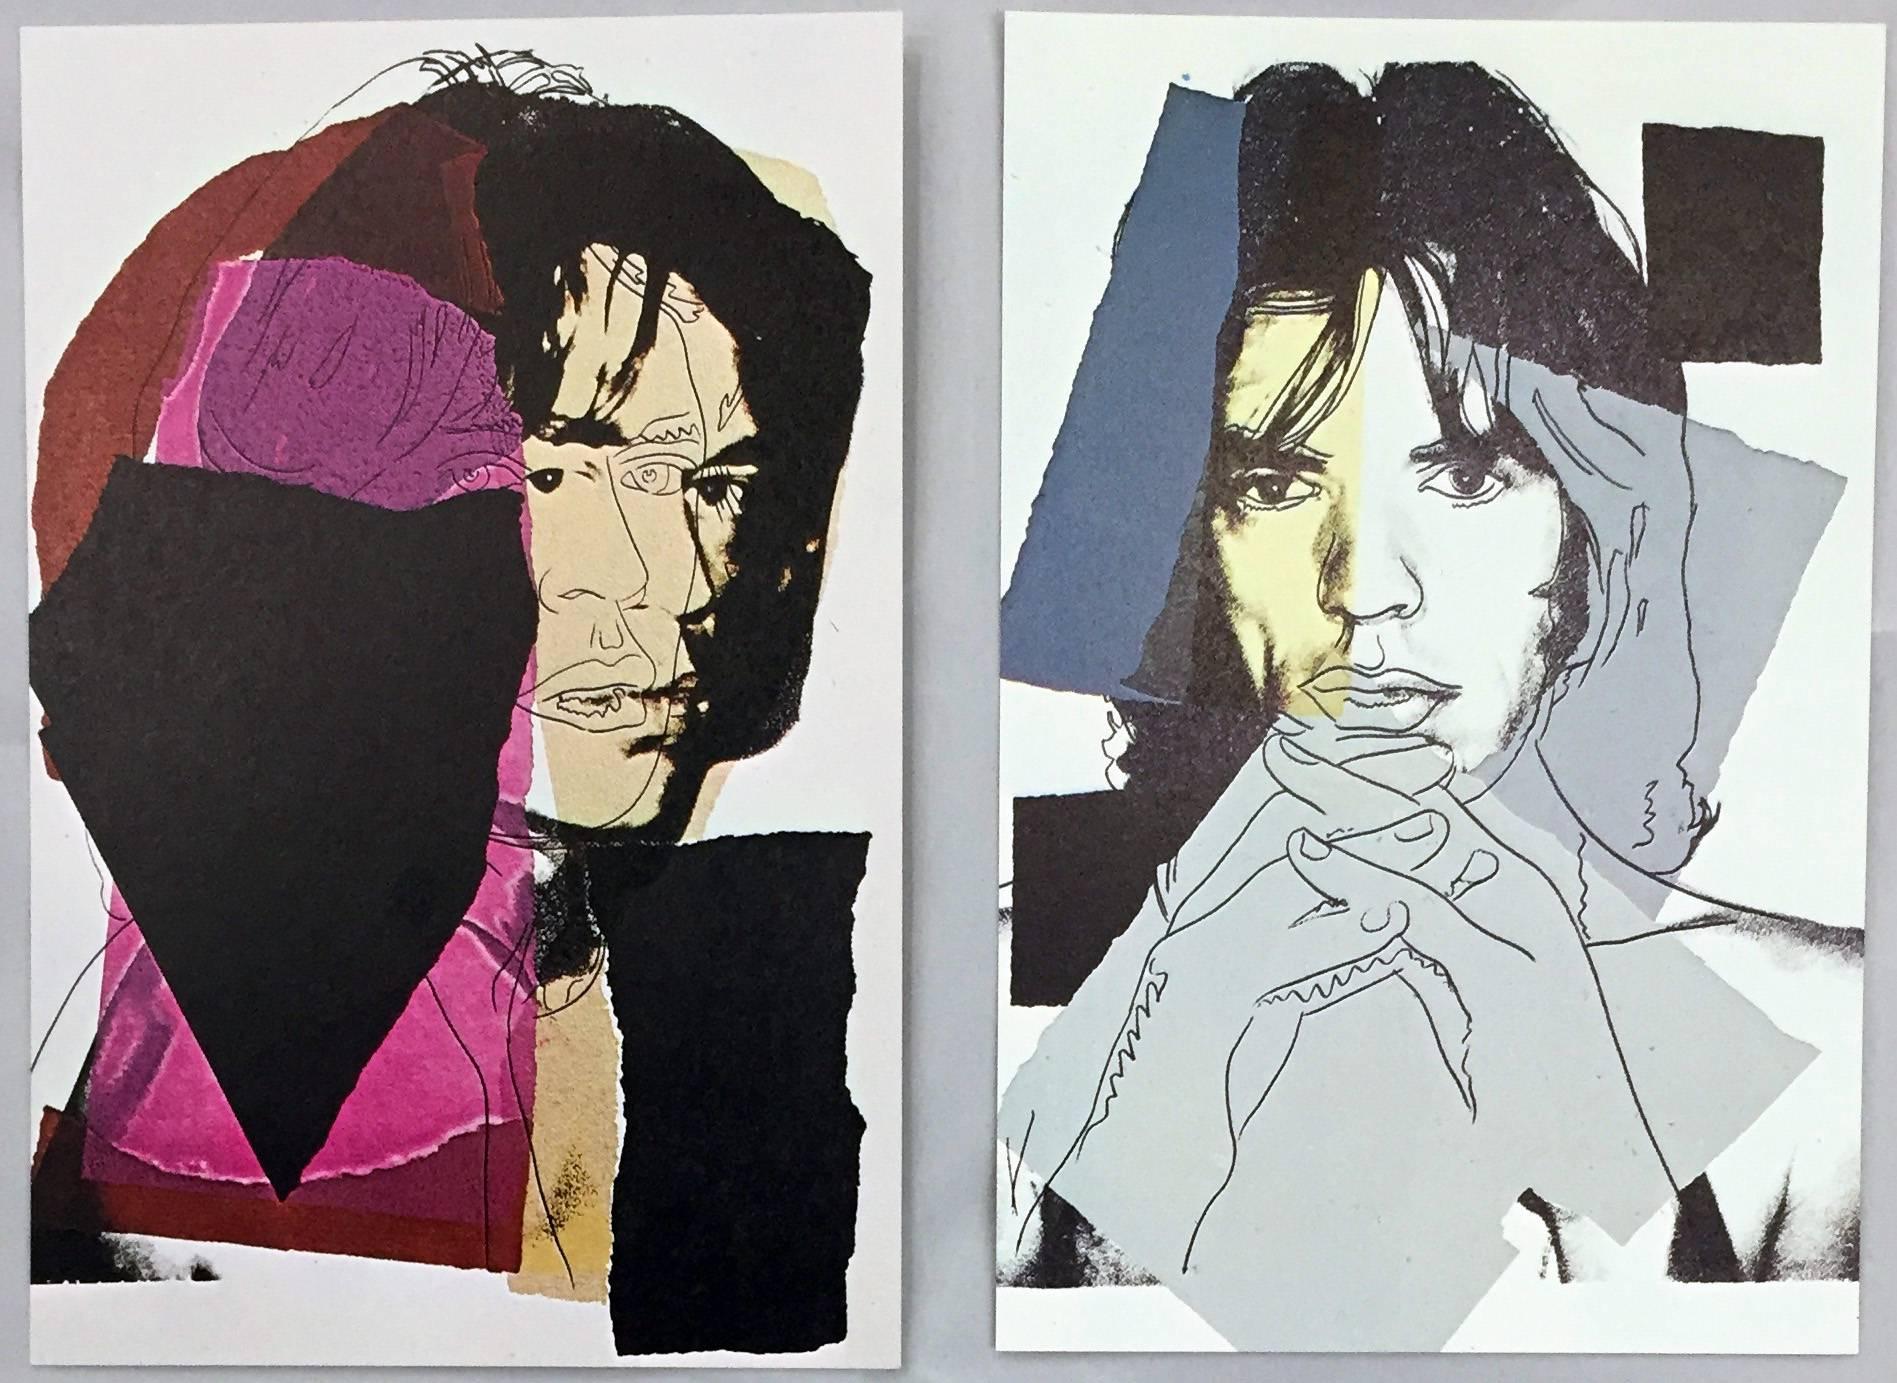 Andy Warhol, Mick Jagger, Leo Castelli 1975:
A stunning set of ten announcement cards published by Castelli Graphics in 1975 to advertise the forthcoming portfolio of ten silkscreen prints by Andy Warhol of Mick Jagger, 1975. The very first